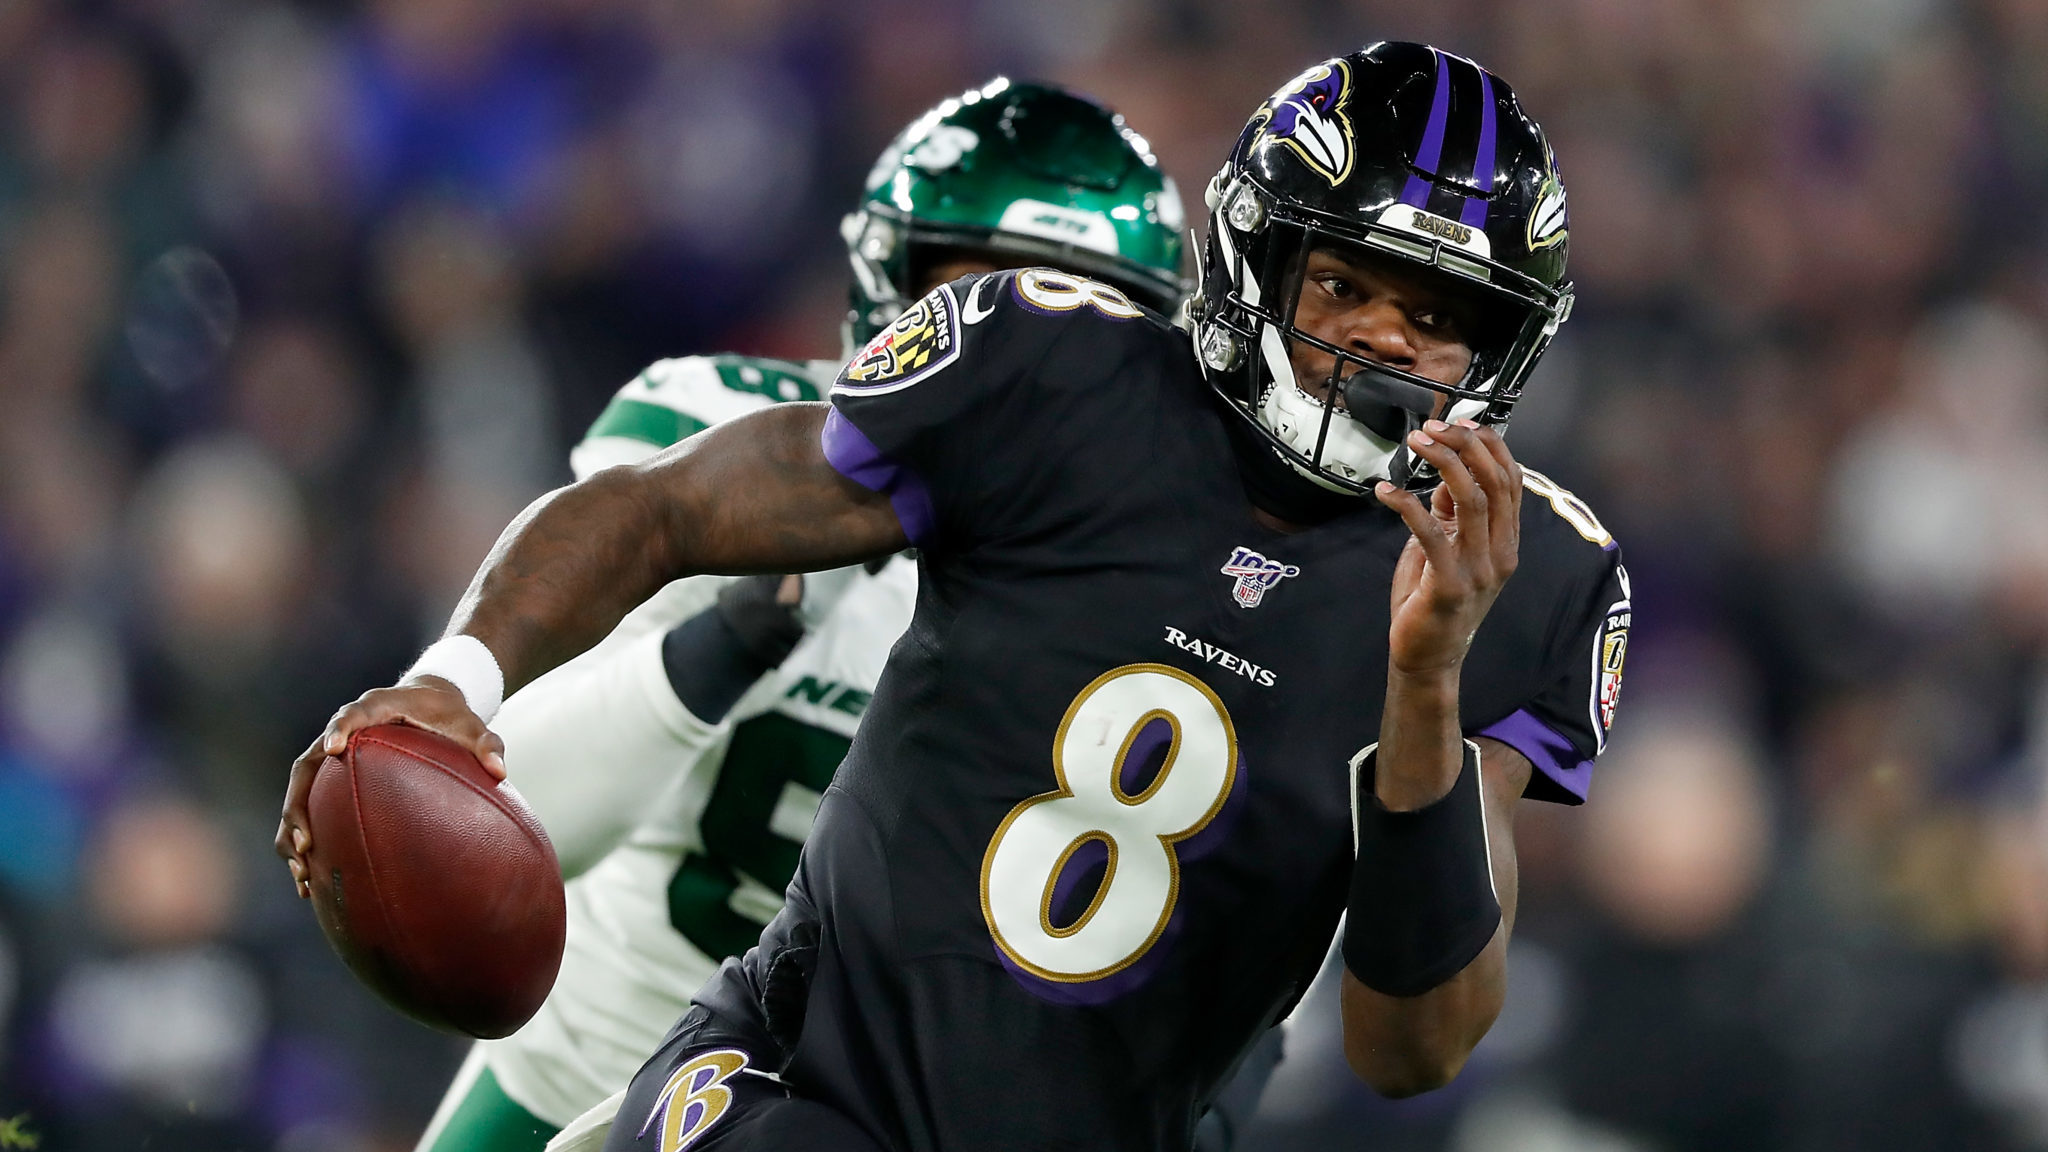 Possible defensive game plans for NY Jets in Week 1 vs. Ravens